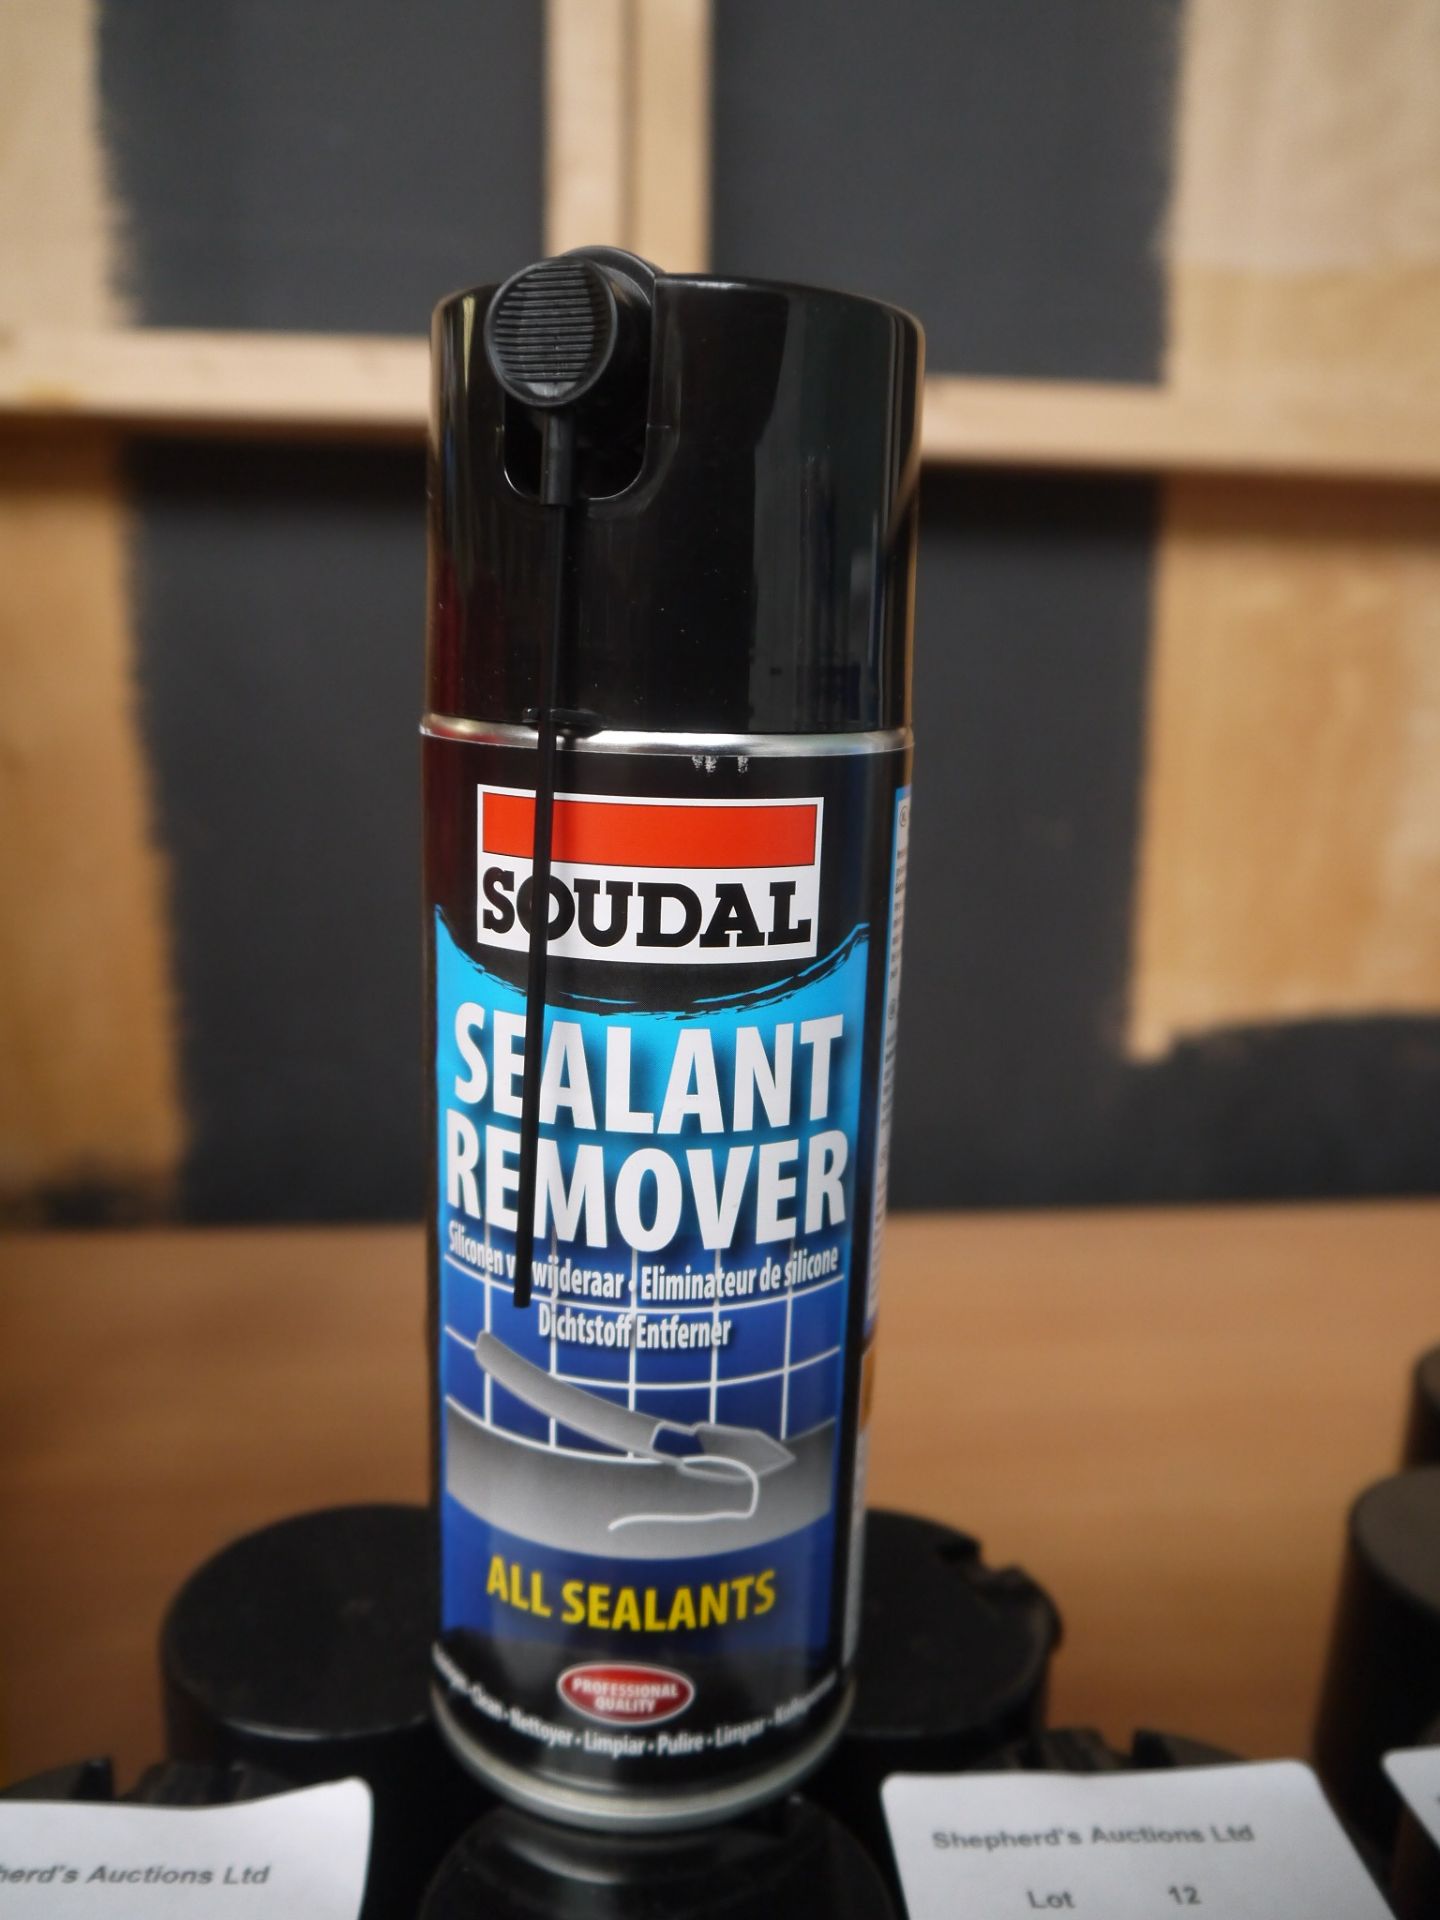 3x 400 ml of SOUDAL Sealant Remover. New.